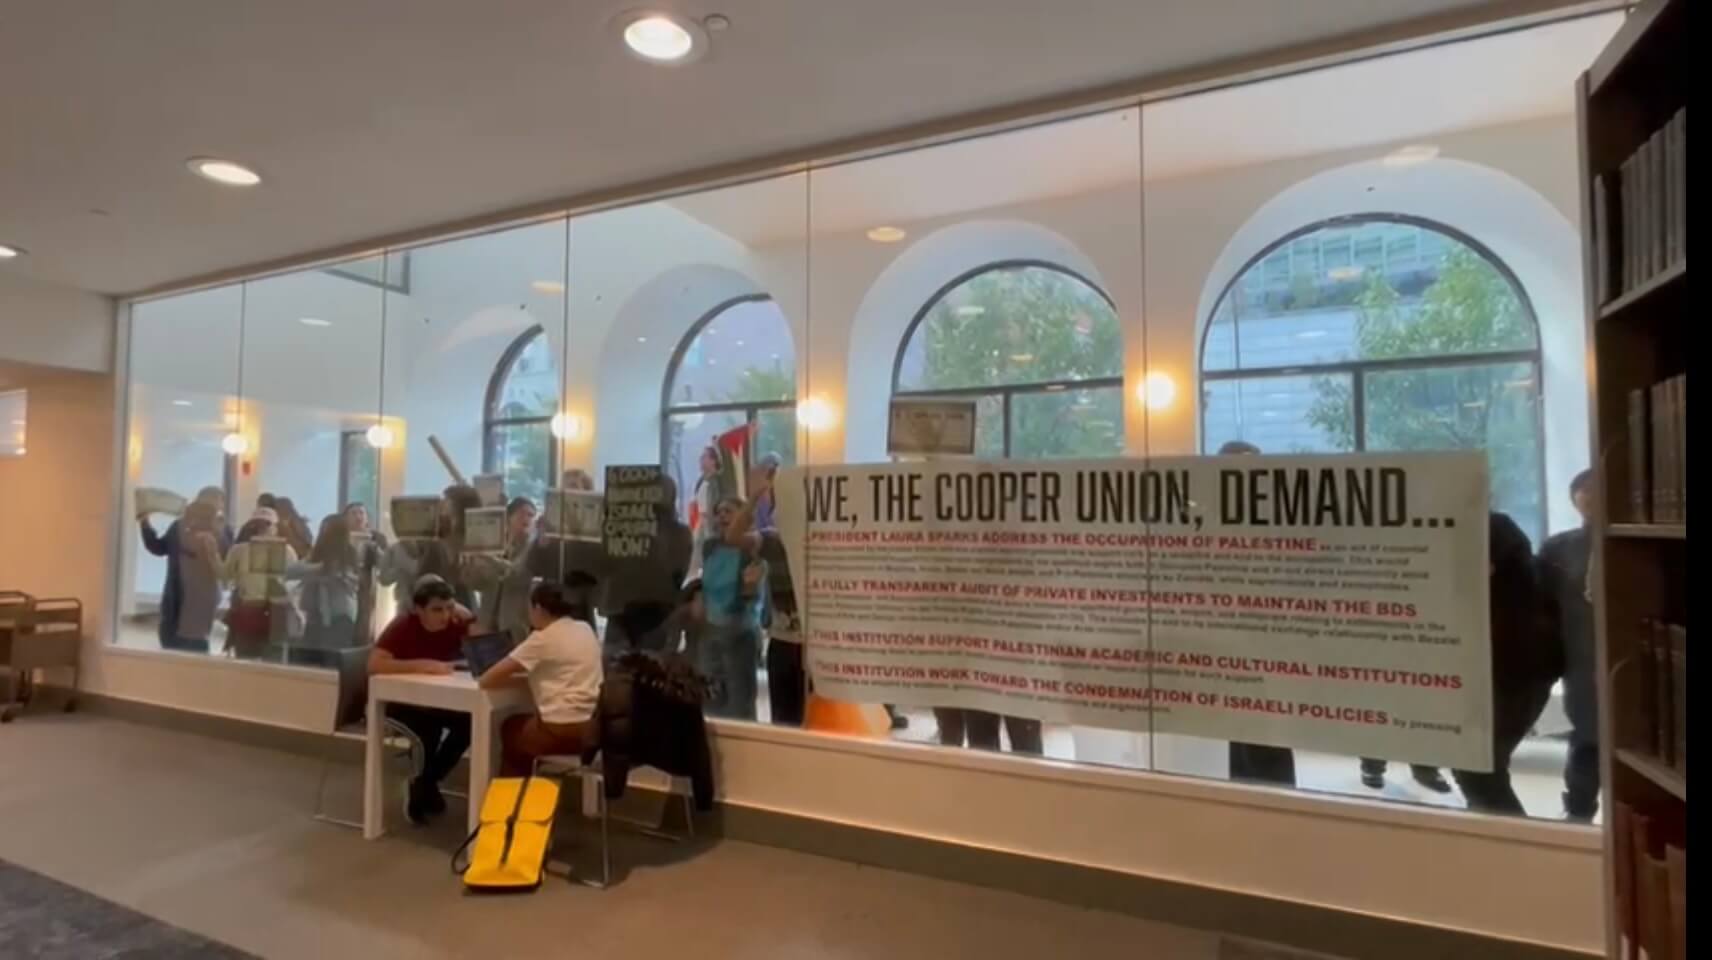 As Jewish students studied inside the Cooper Union library, a pro-Palestinian protest formed on the other side of the glass. One student who was inside said the action was "targeted."